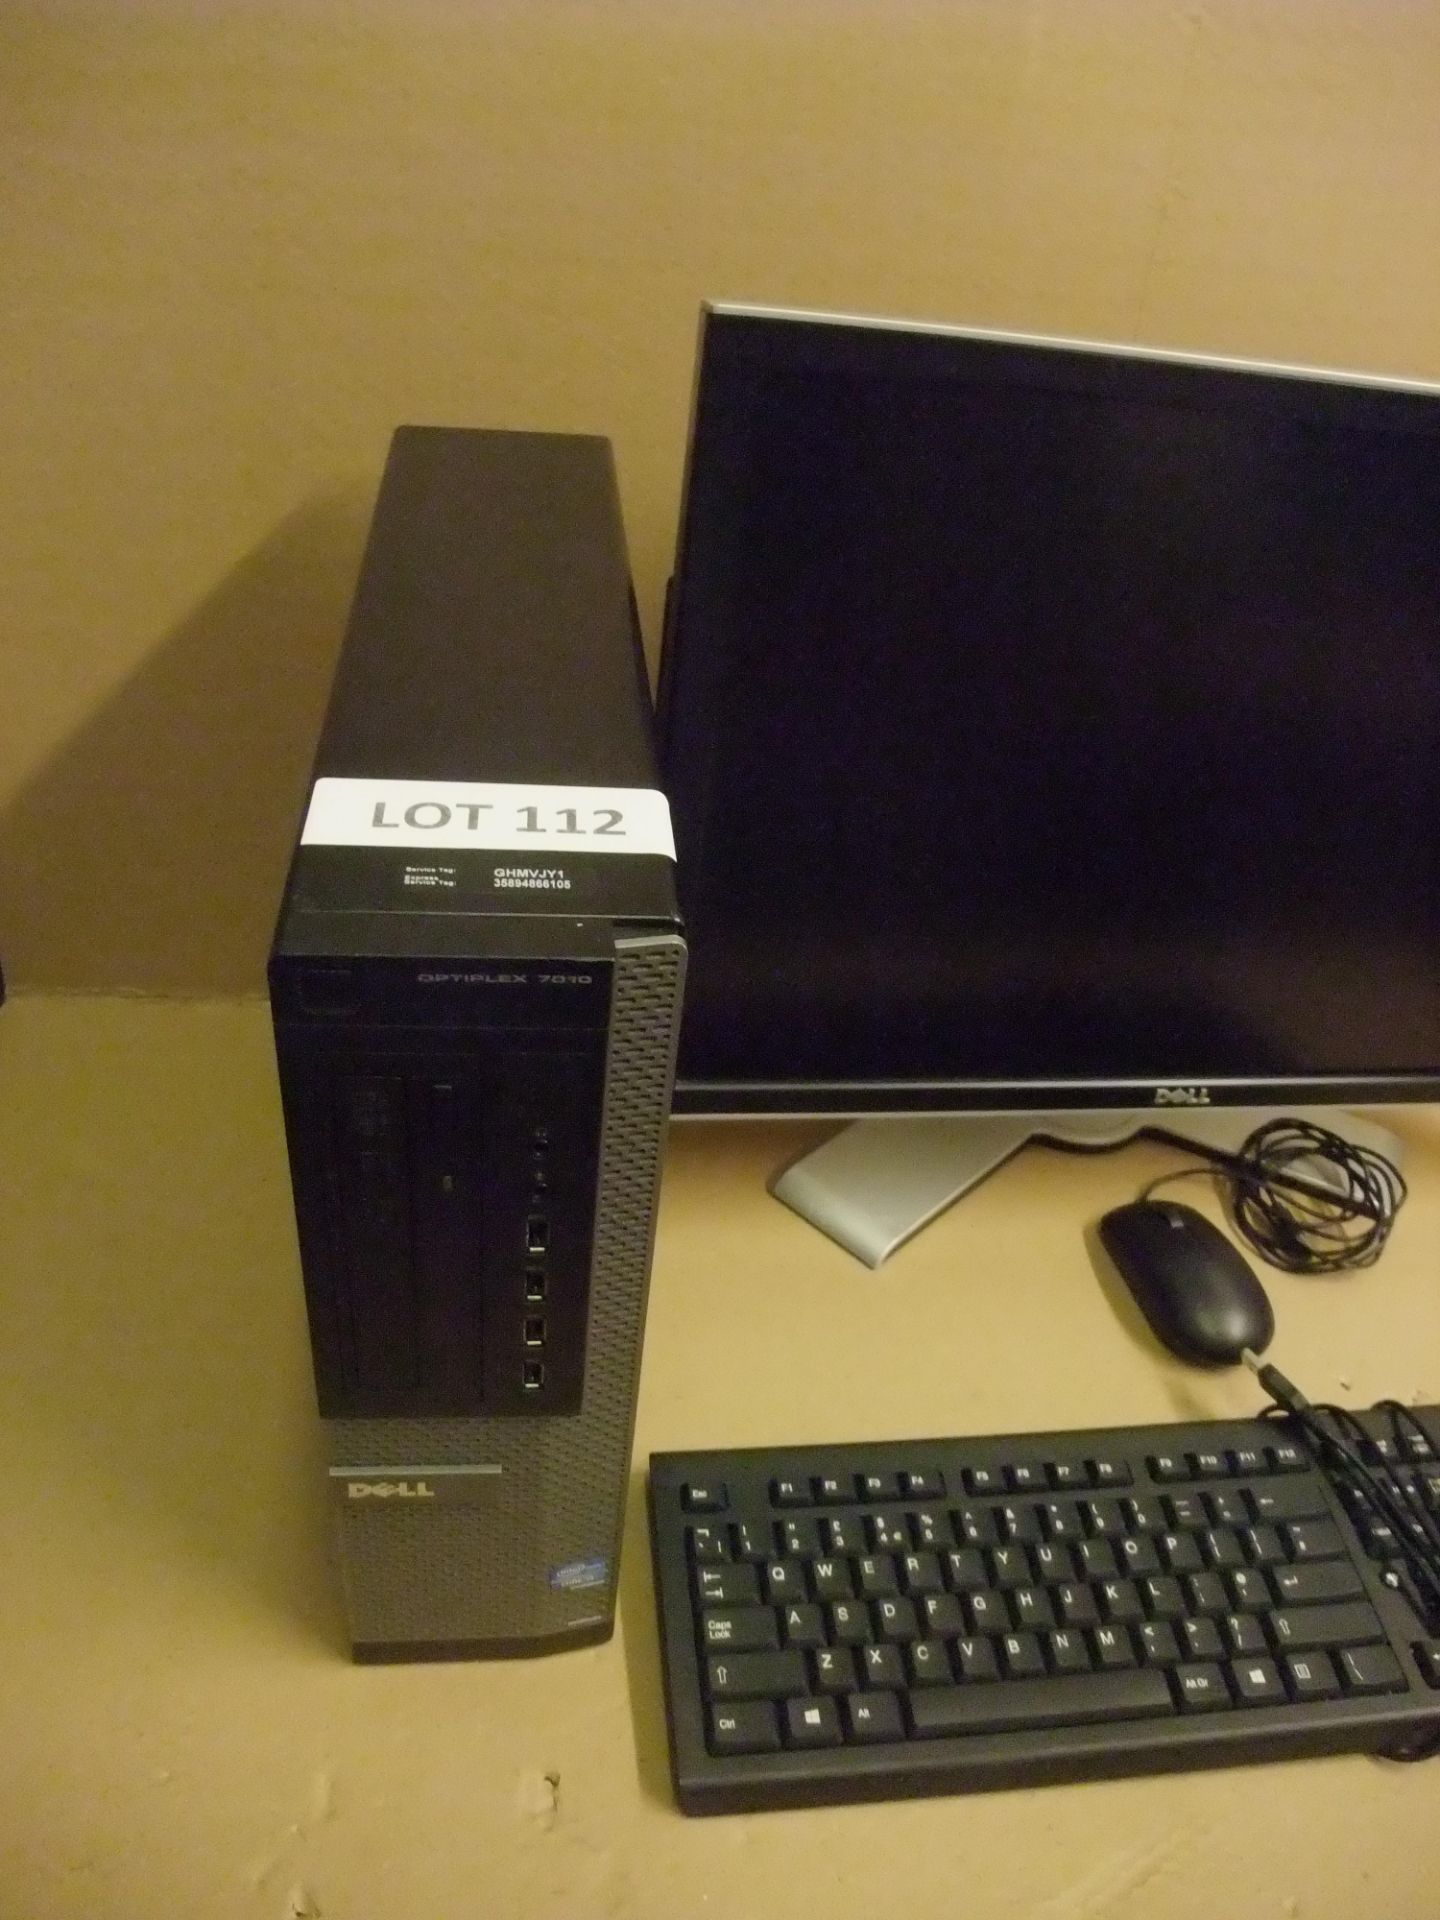 Dell OptiPlex 7010 Personal Computer - i5, 4Gb RAM, 120Gb SSD, Windows 10 Pro, with Dell 2407WFP 24" - Image 2 of 3